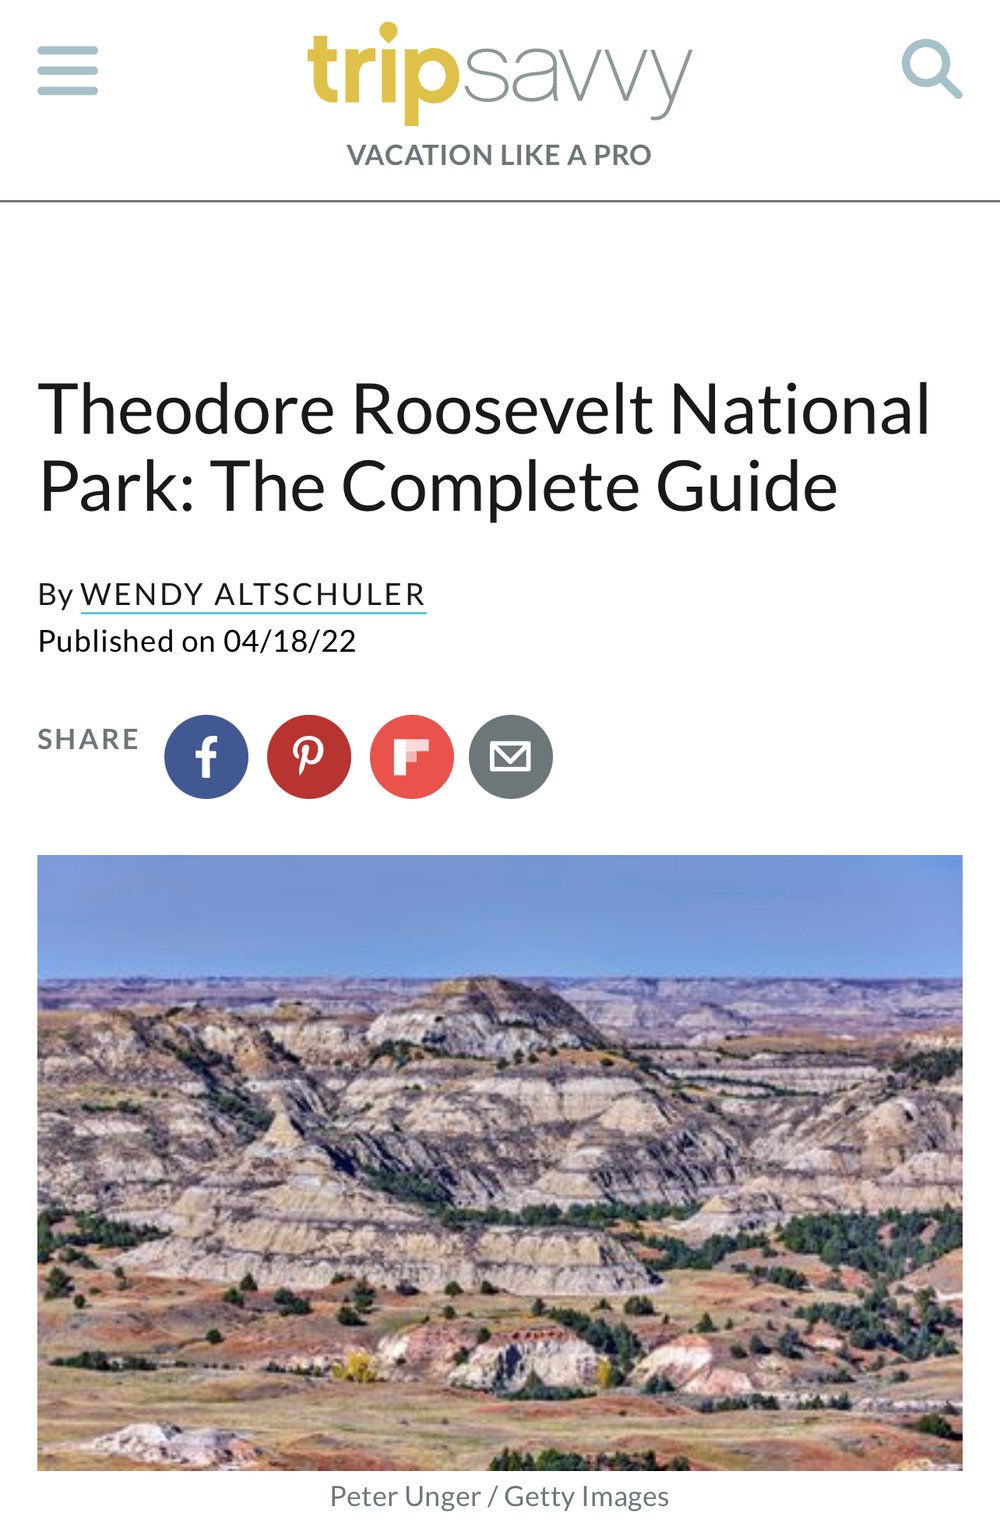 Theodore Roosevelt National Park: The Complete Guide